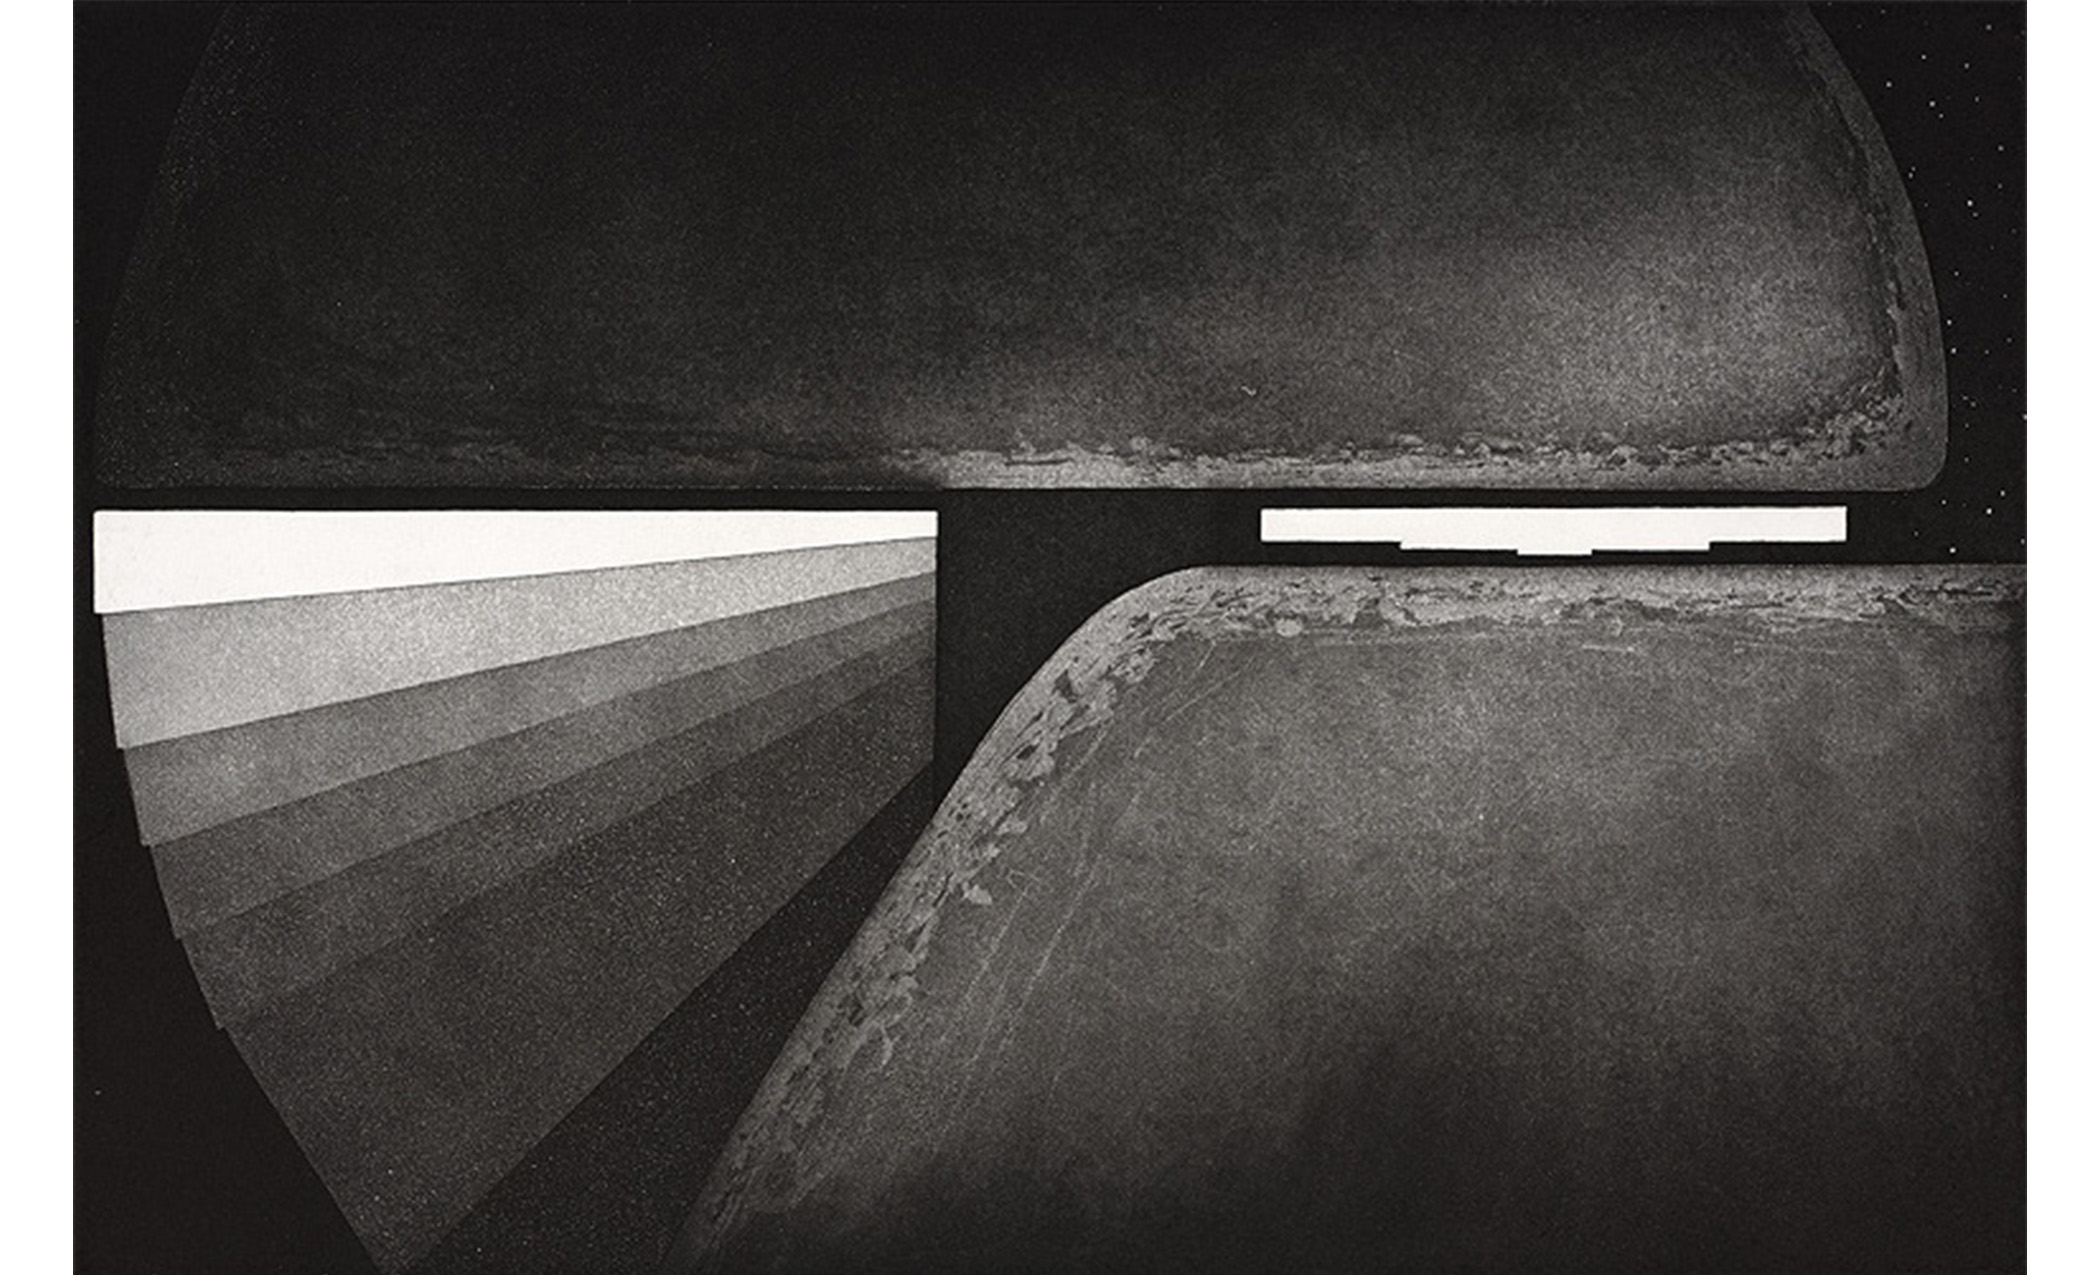 abstract. at the left, a staircase-like shape with each step a darker shade of gray. two large, very dark gray semi-circular shapes on the top and bottom of the image with small white bar in between them.